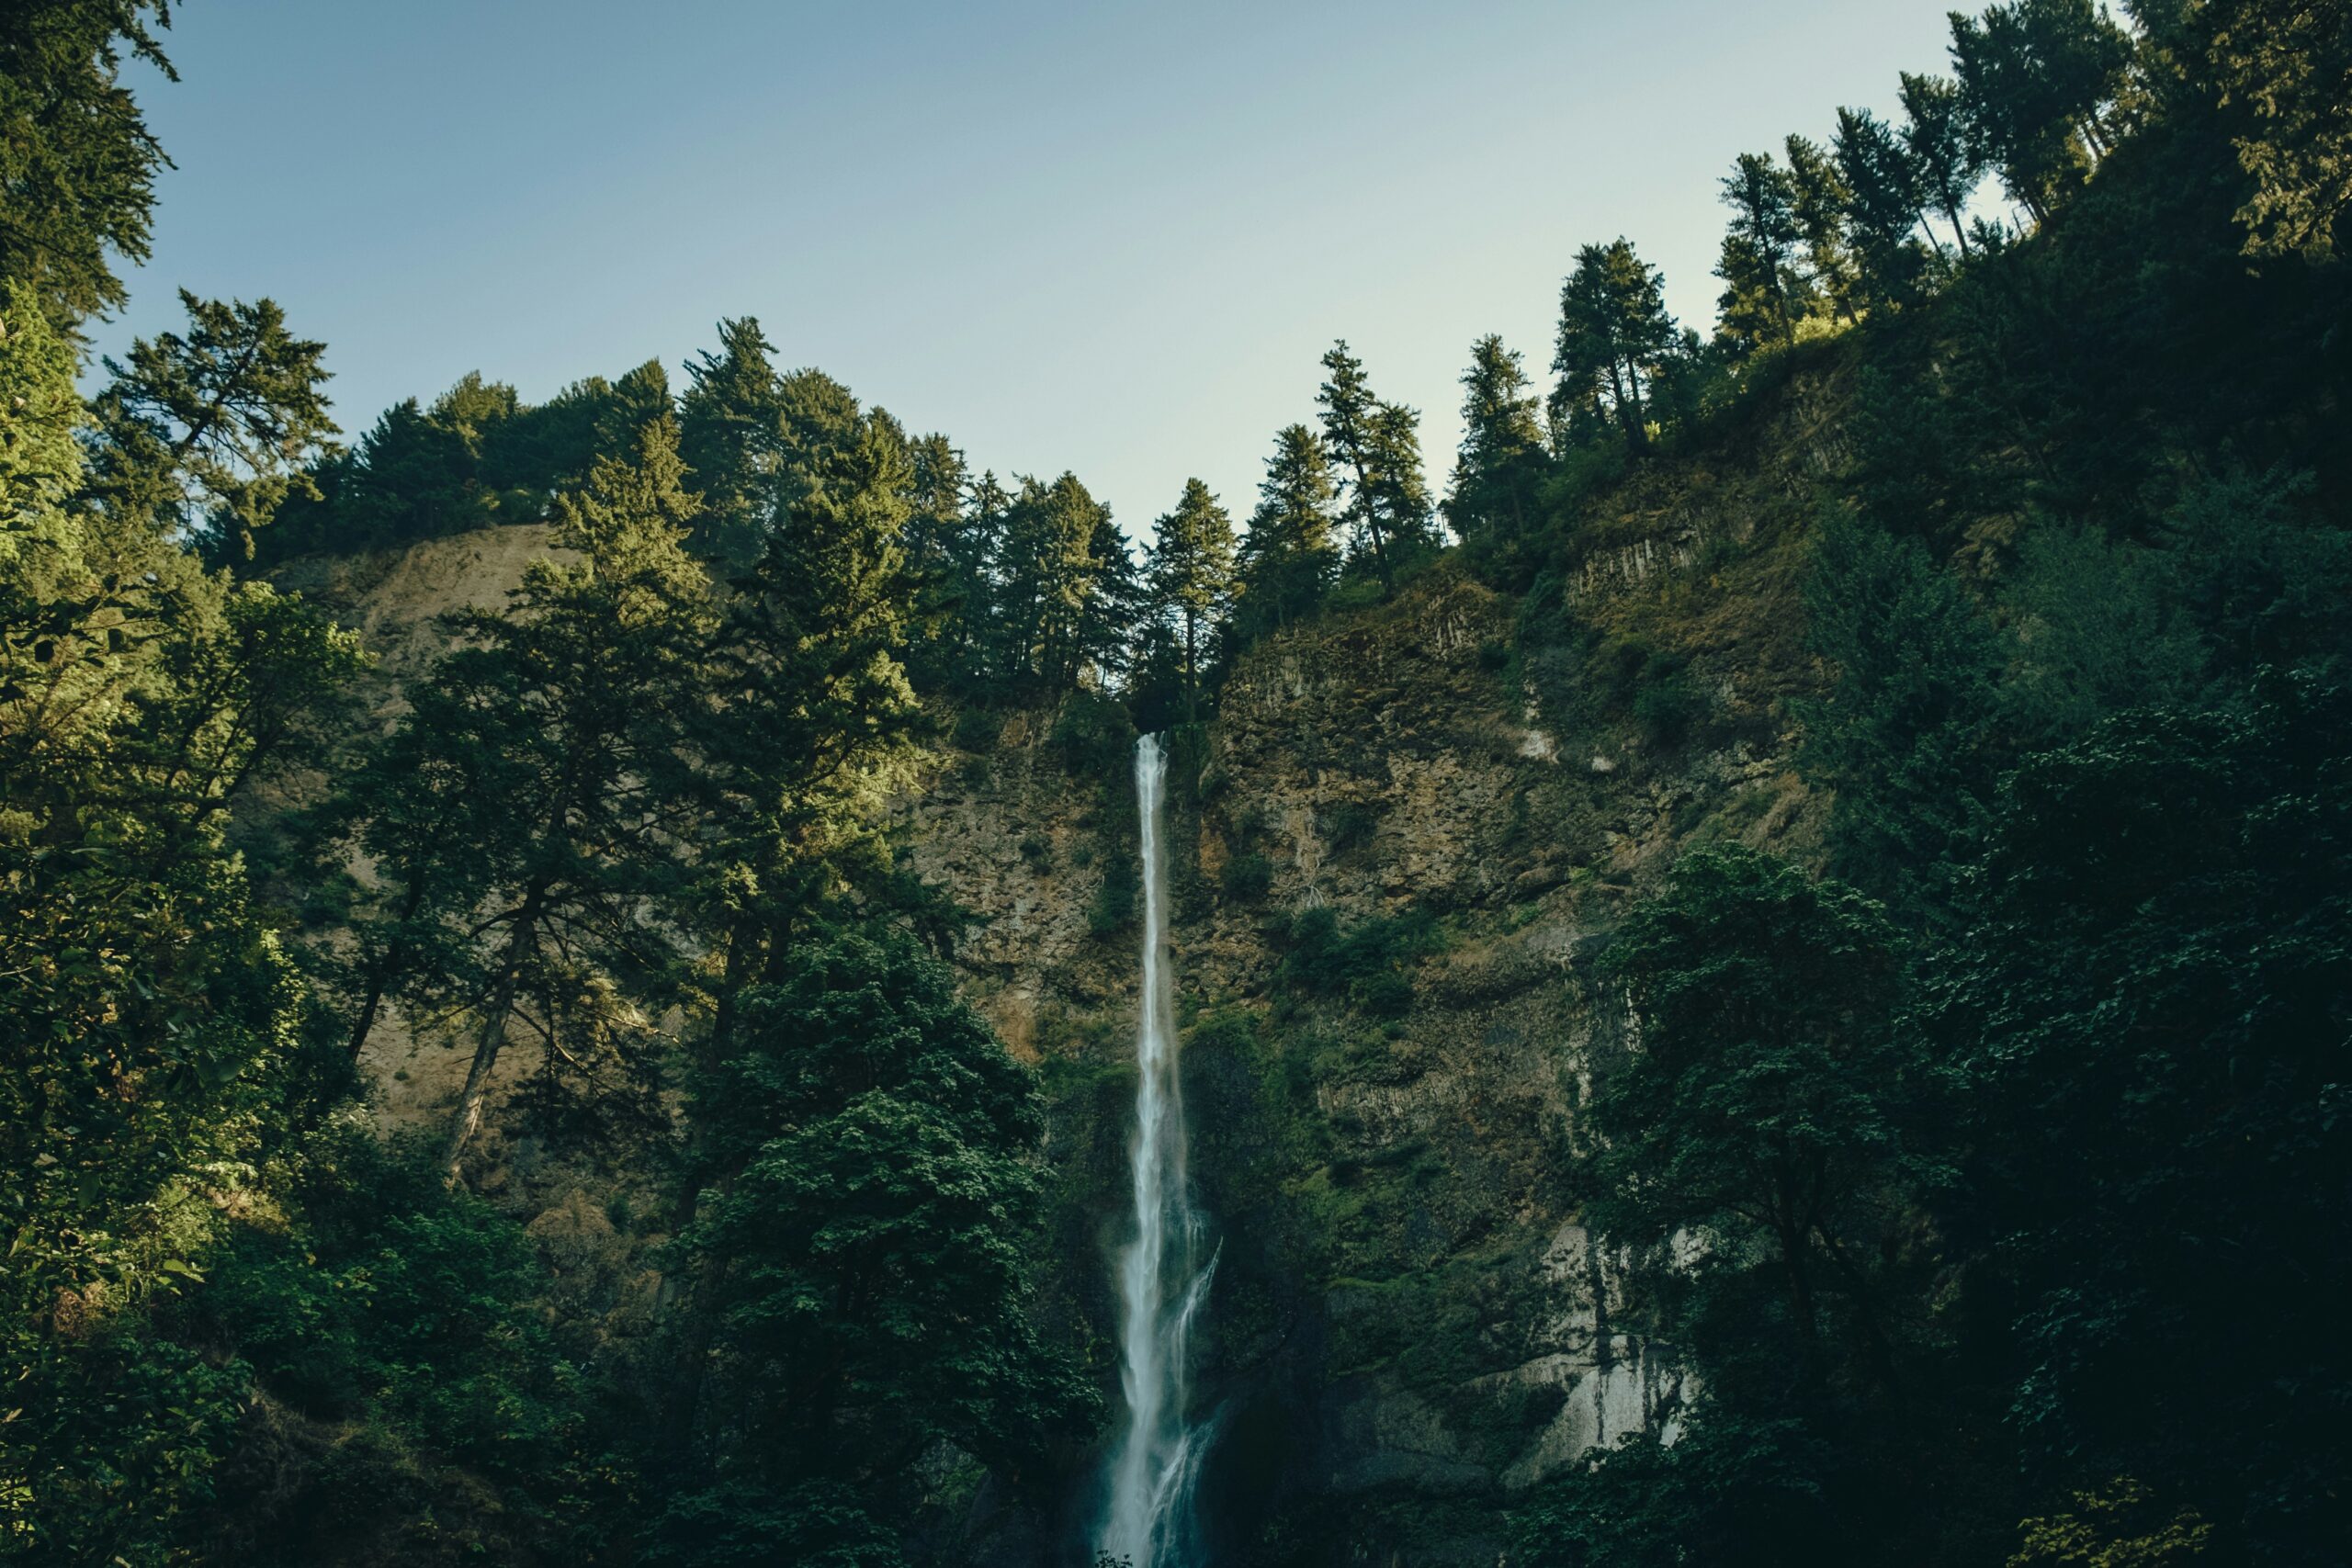 A wide, clear shot of a waterfall